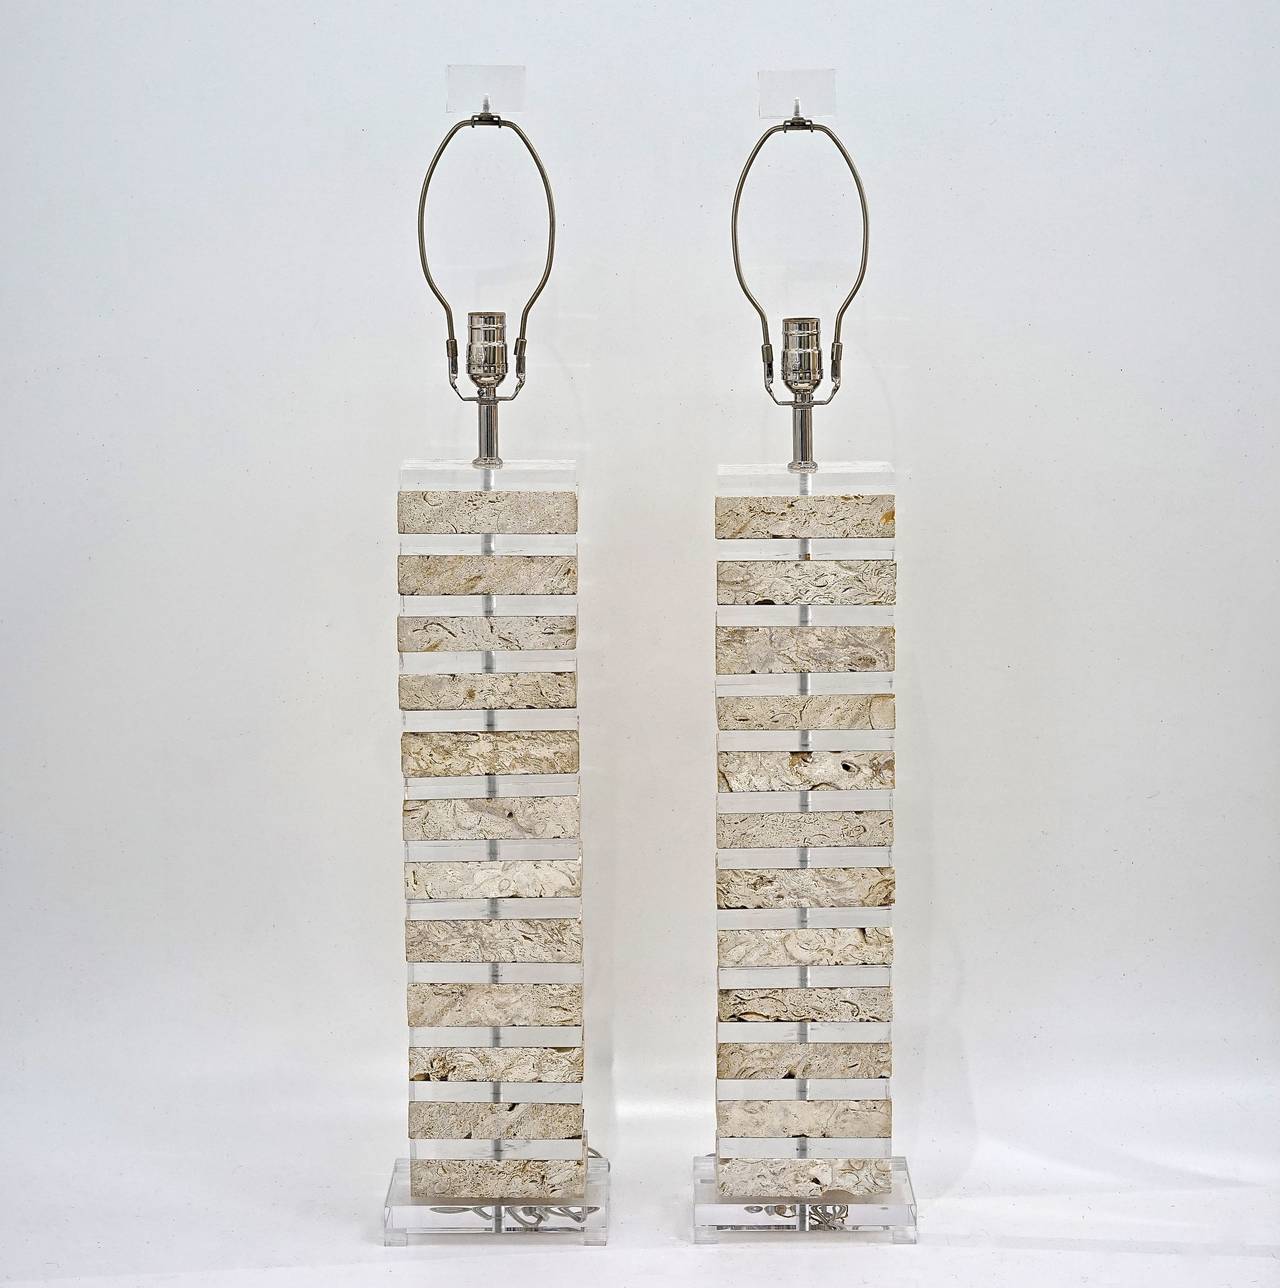 This pair of Karl Springer-style table lamps are monumental in their scale and beauty.  Each lamp, with polished chrome stems and 3-way sockets, has been rewired and is comprised of 12-pieces of fossilized Coquina stone/coral in a soft, chalky,